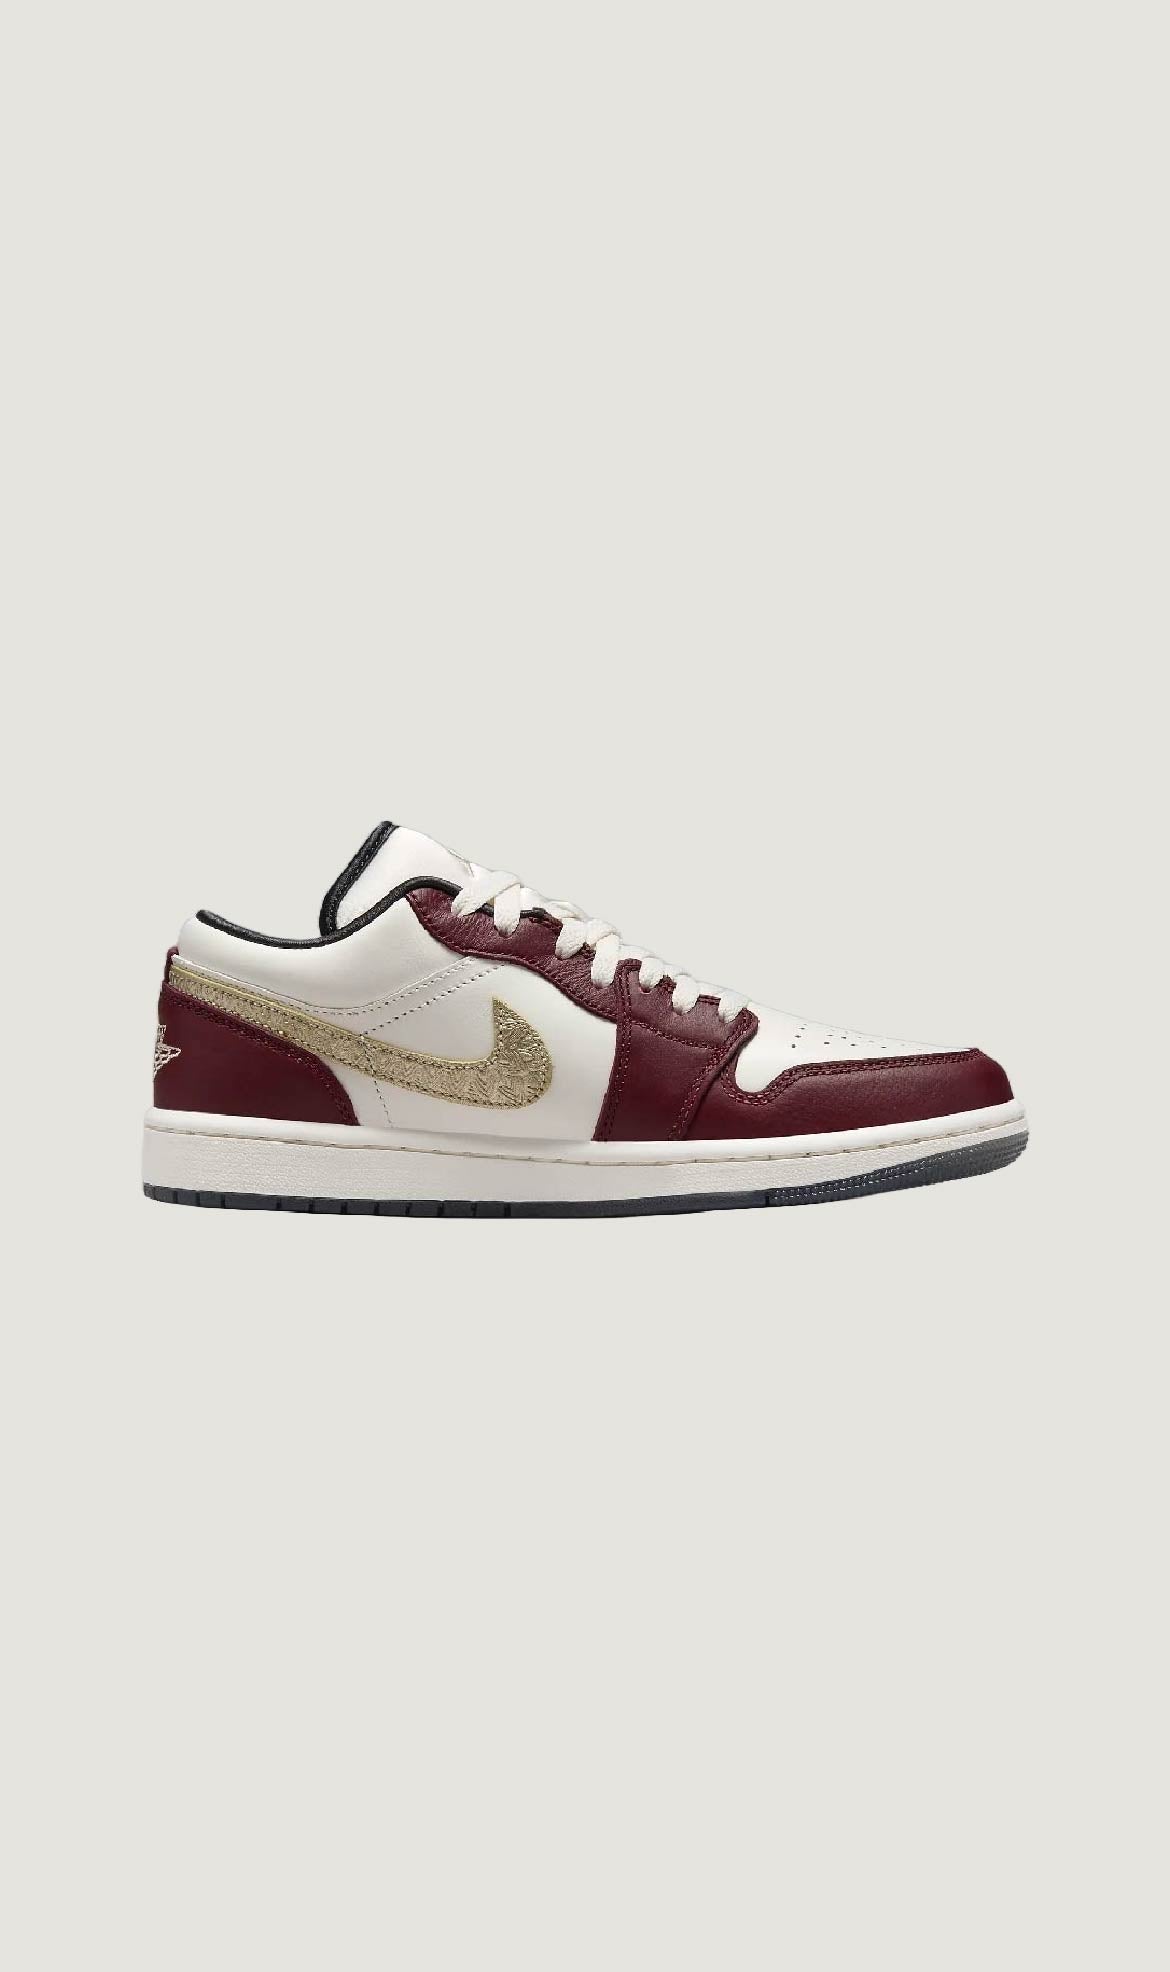 WMNS AIR JORDAN 1 LOW SE - CHINESE NEW YEAR